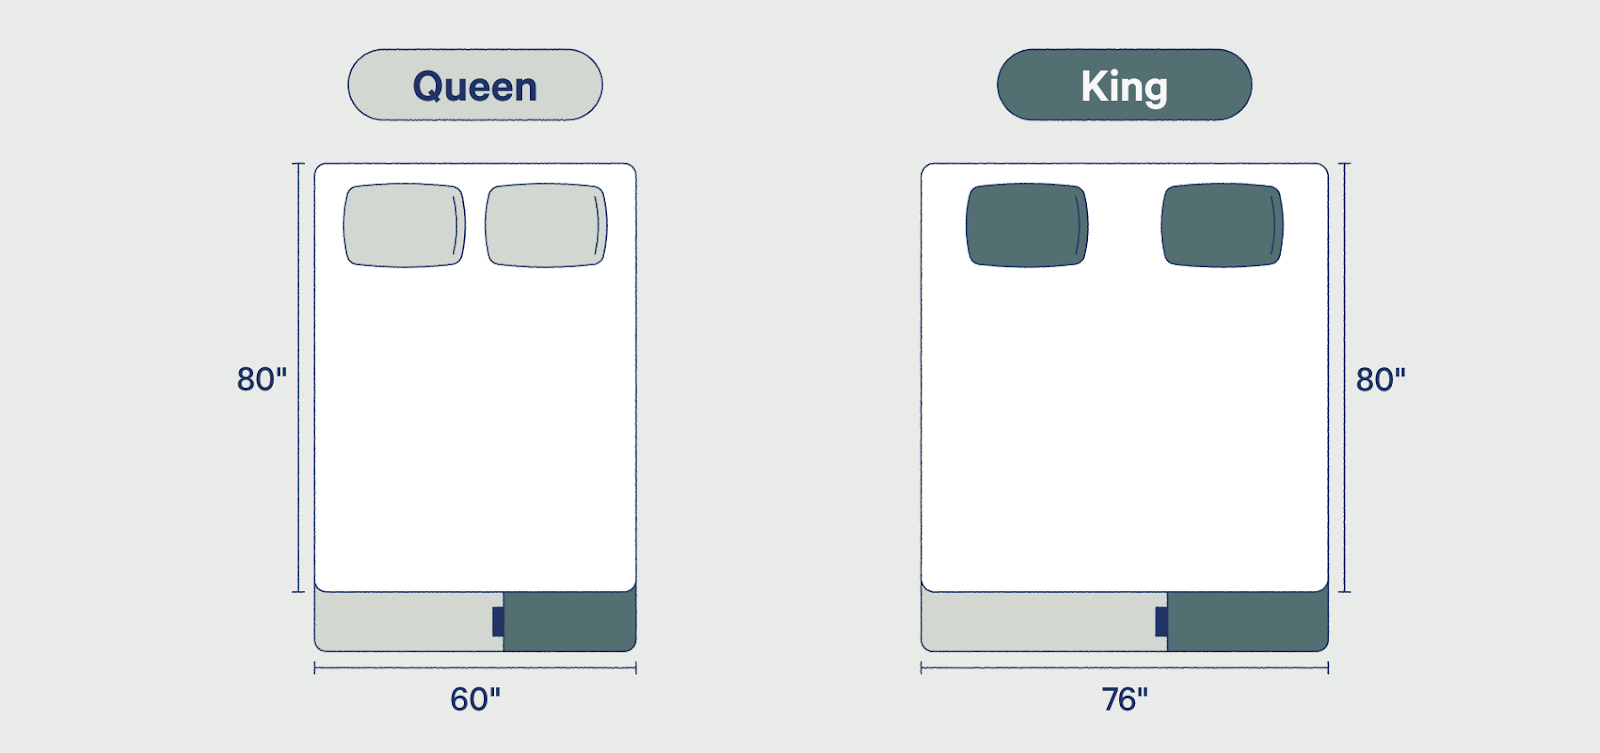 King Vs Queen Bed Size And Comparison, King Size Bed Dims